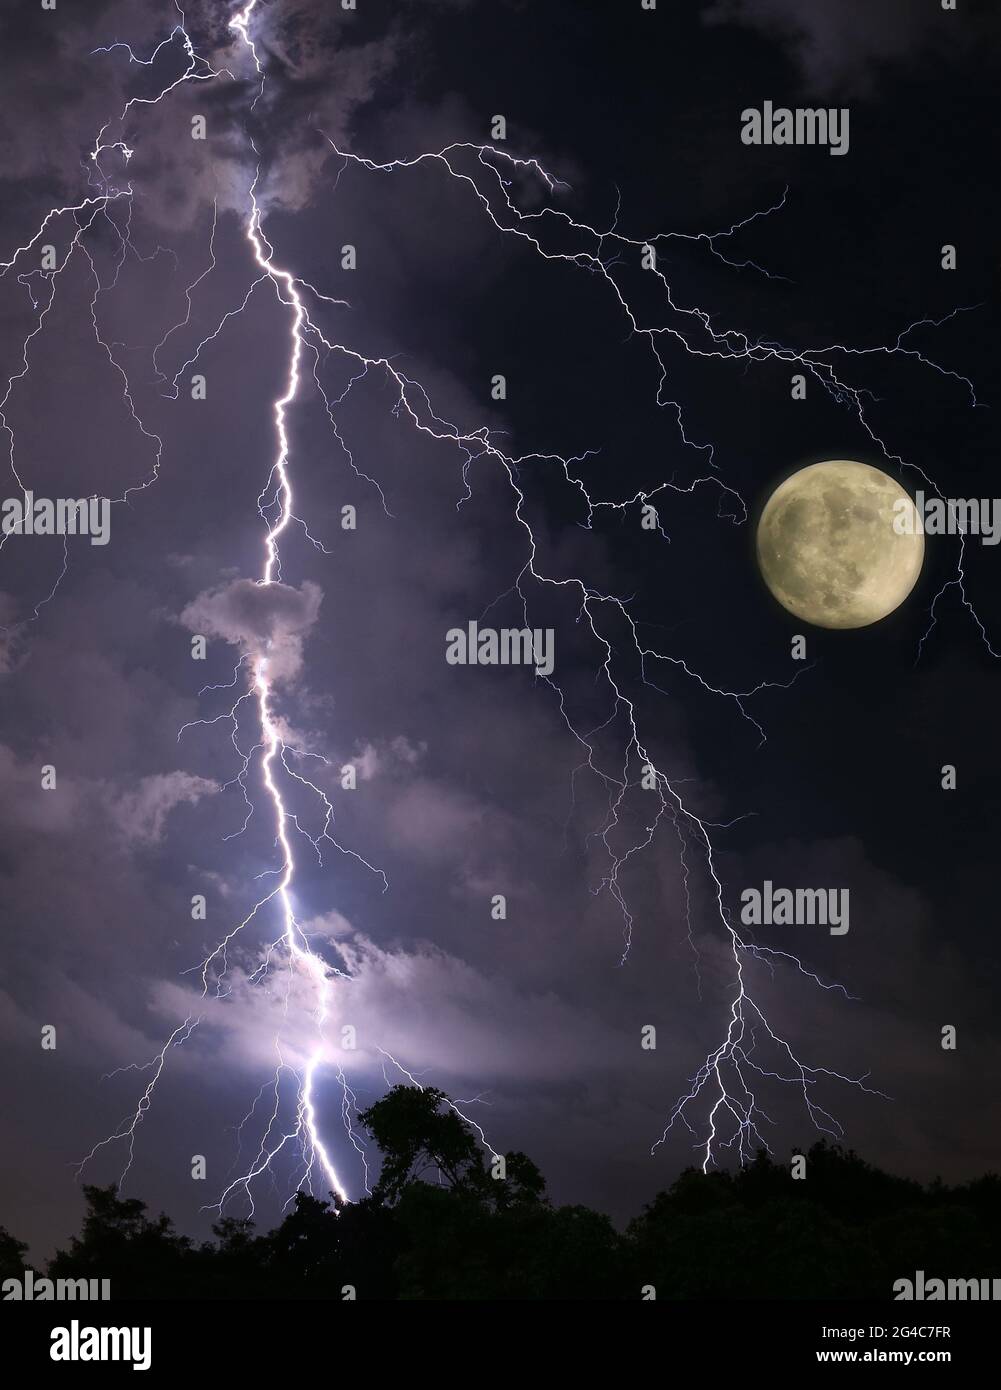 Incredible Lightning Strikes in the Night Sky with Spooky Full Moon Stock Photo